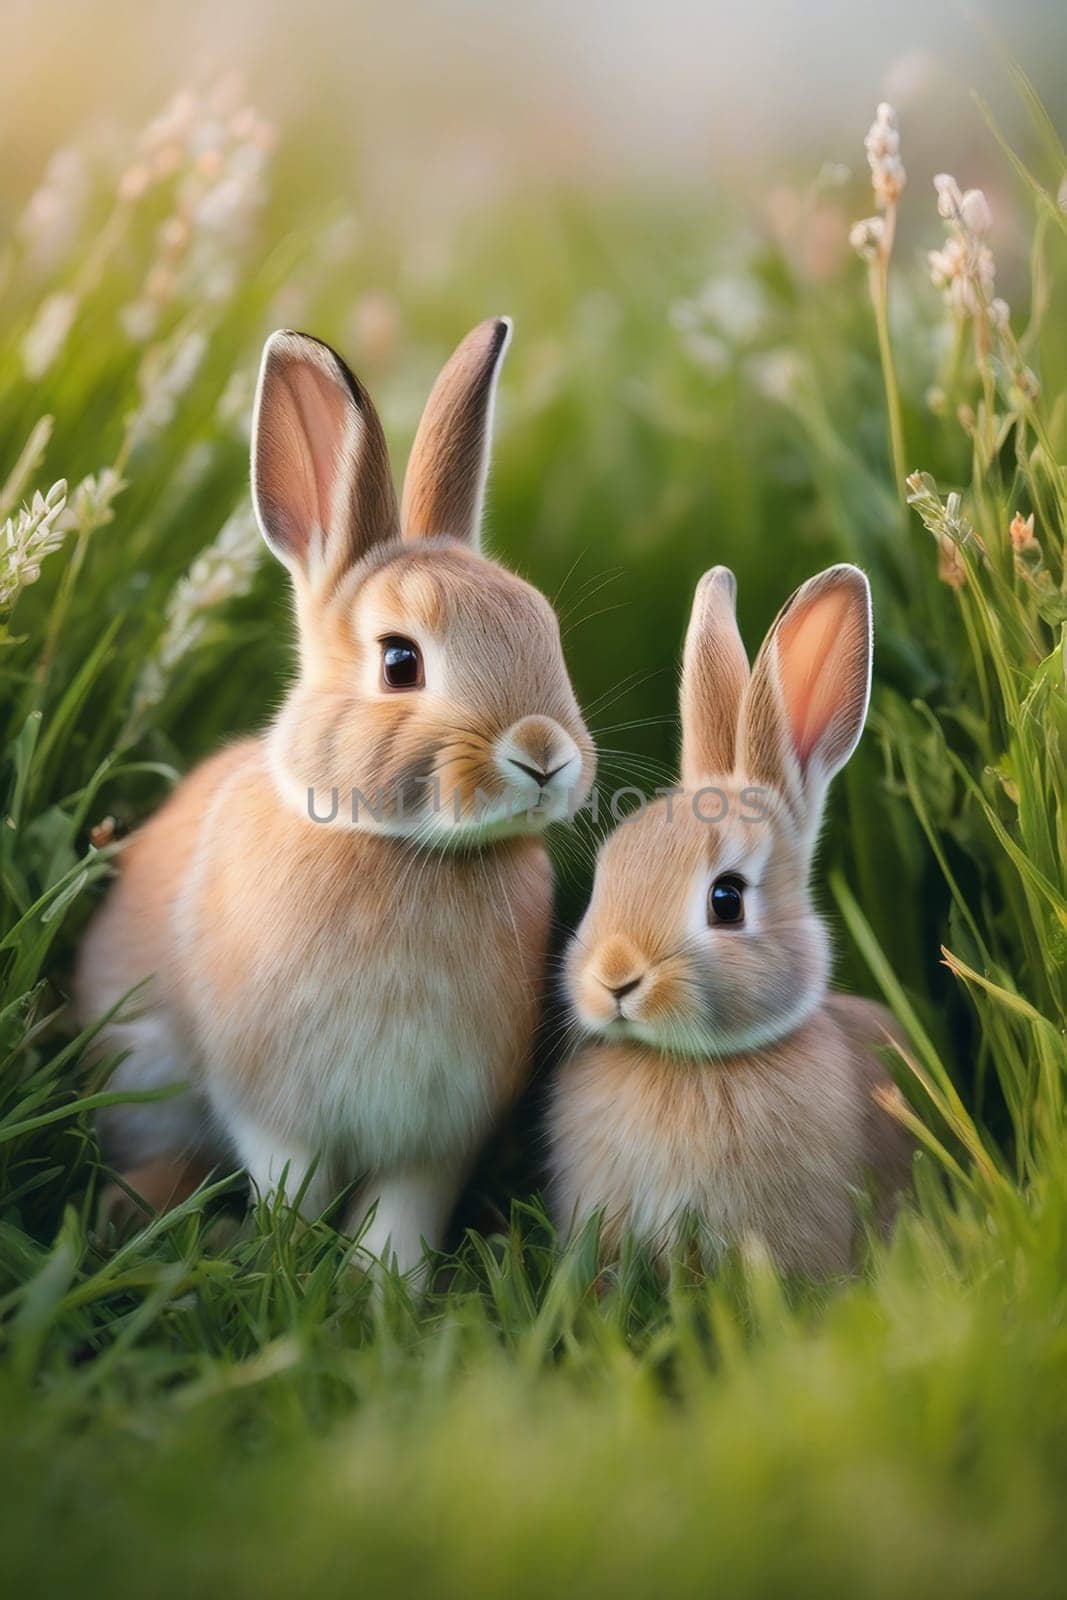 Rabbits. Mother rabbit and baby rabbit on a green meadow. Spring flowers and green grass